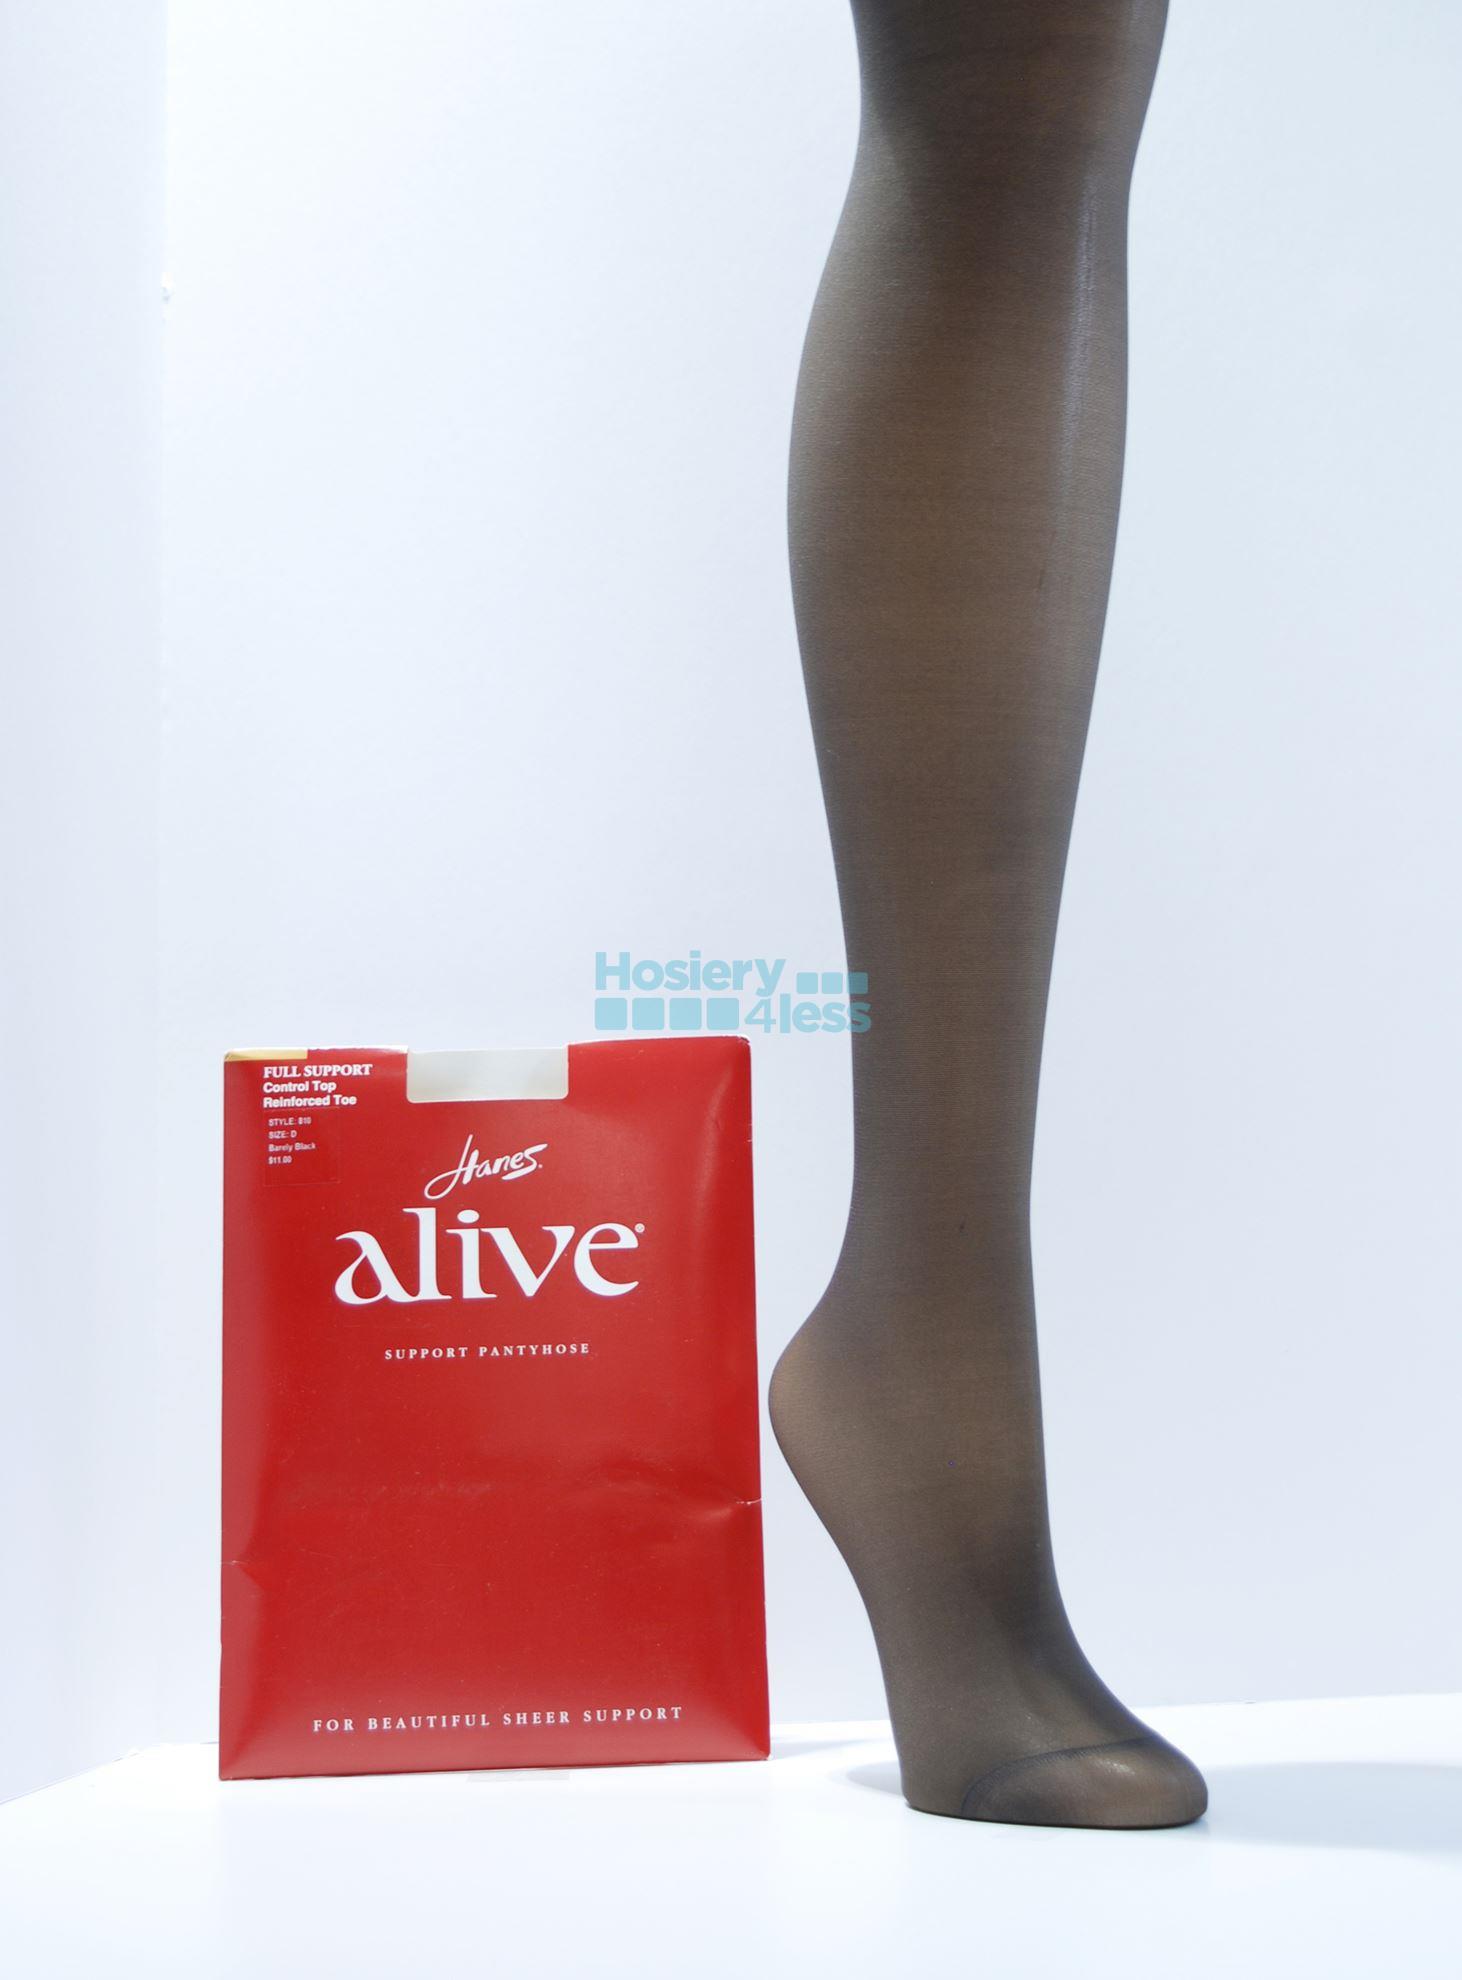 Lot of 3 Hanes Alive Pantyhose Style 810 Size E Full Support Reinforce Toe  C-Top